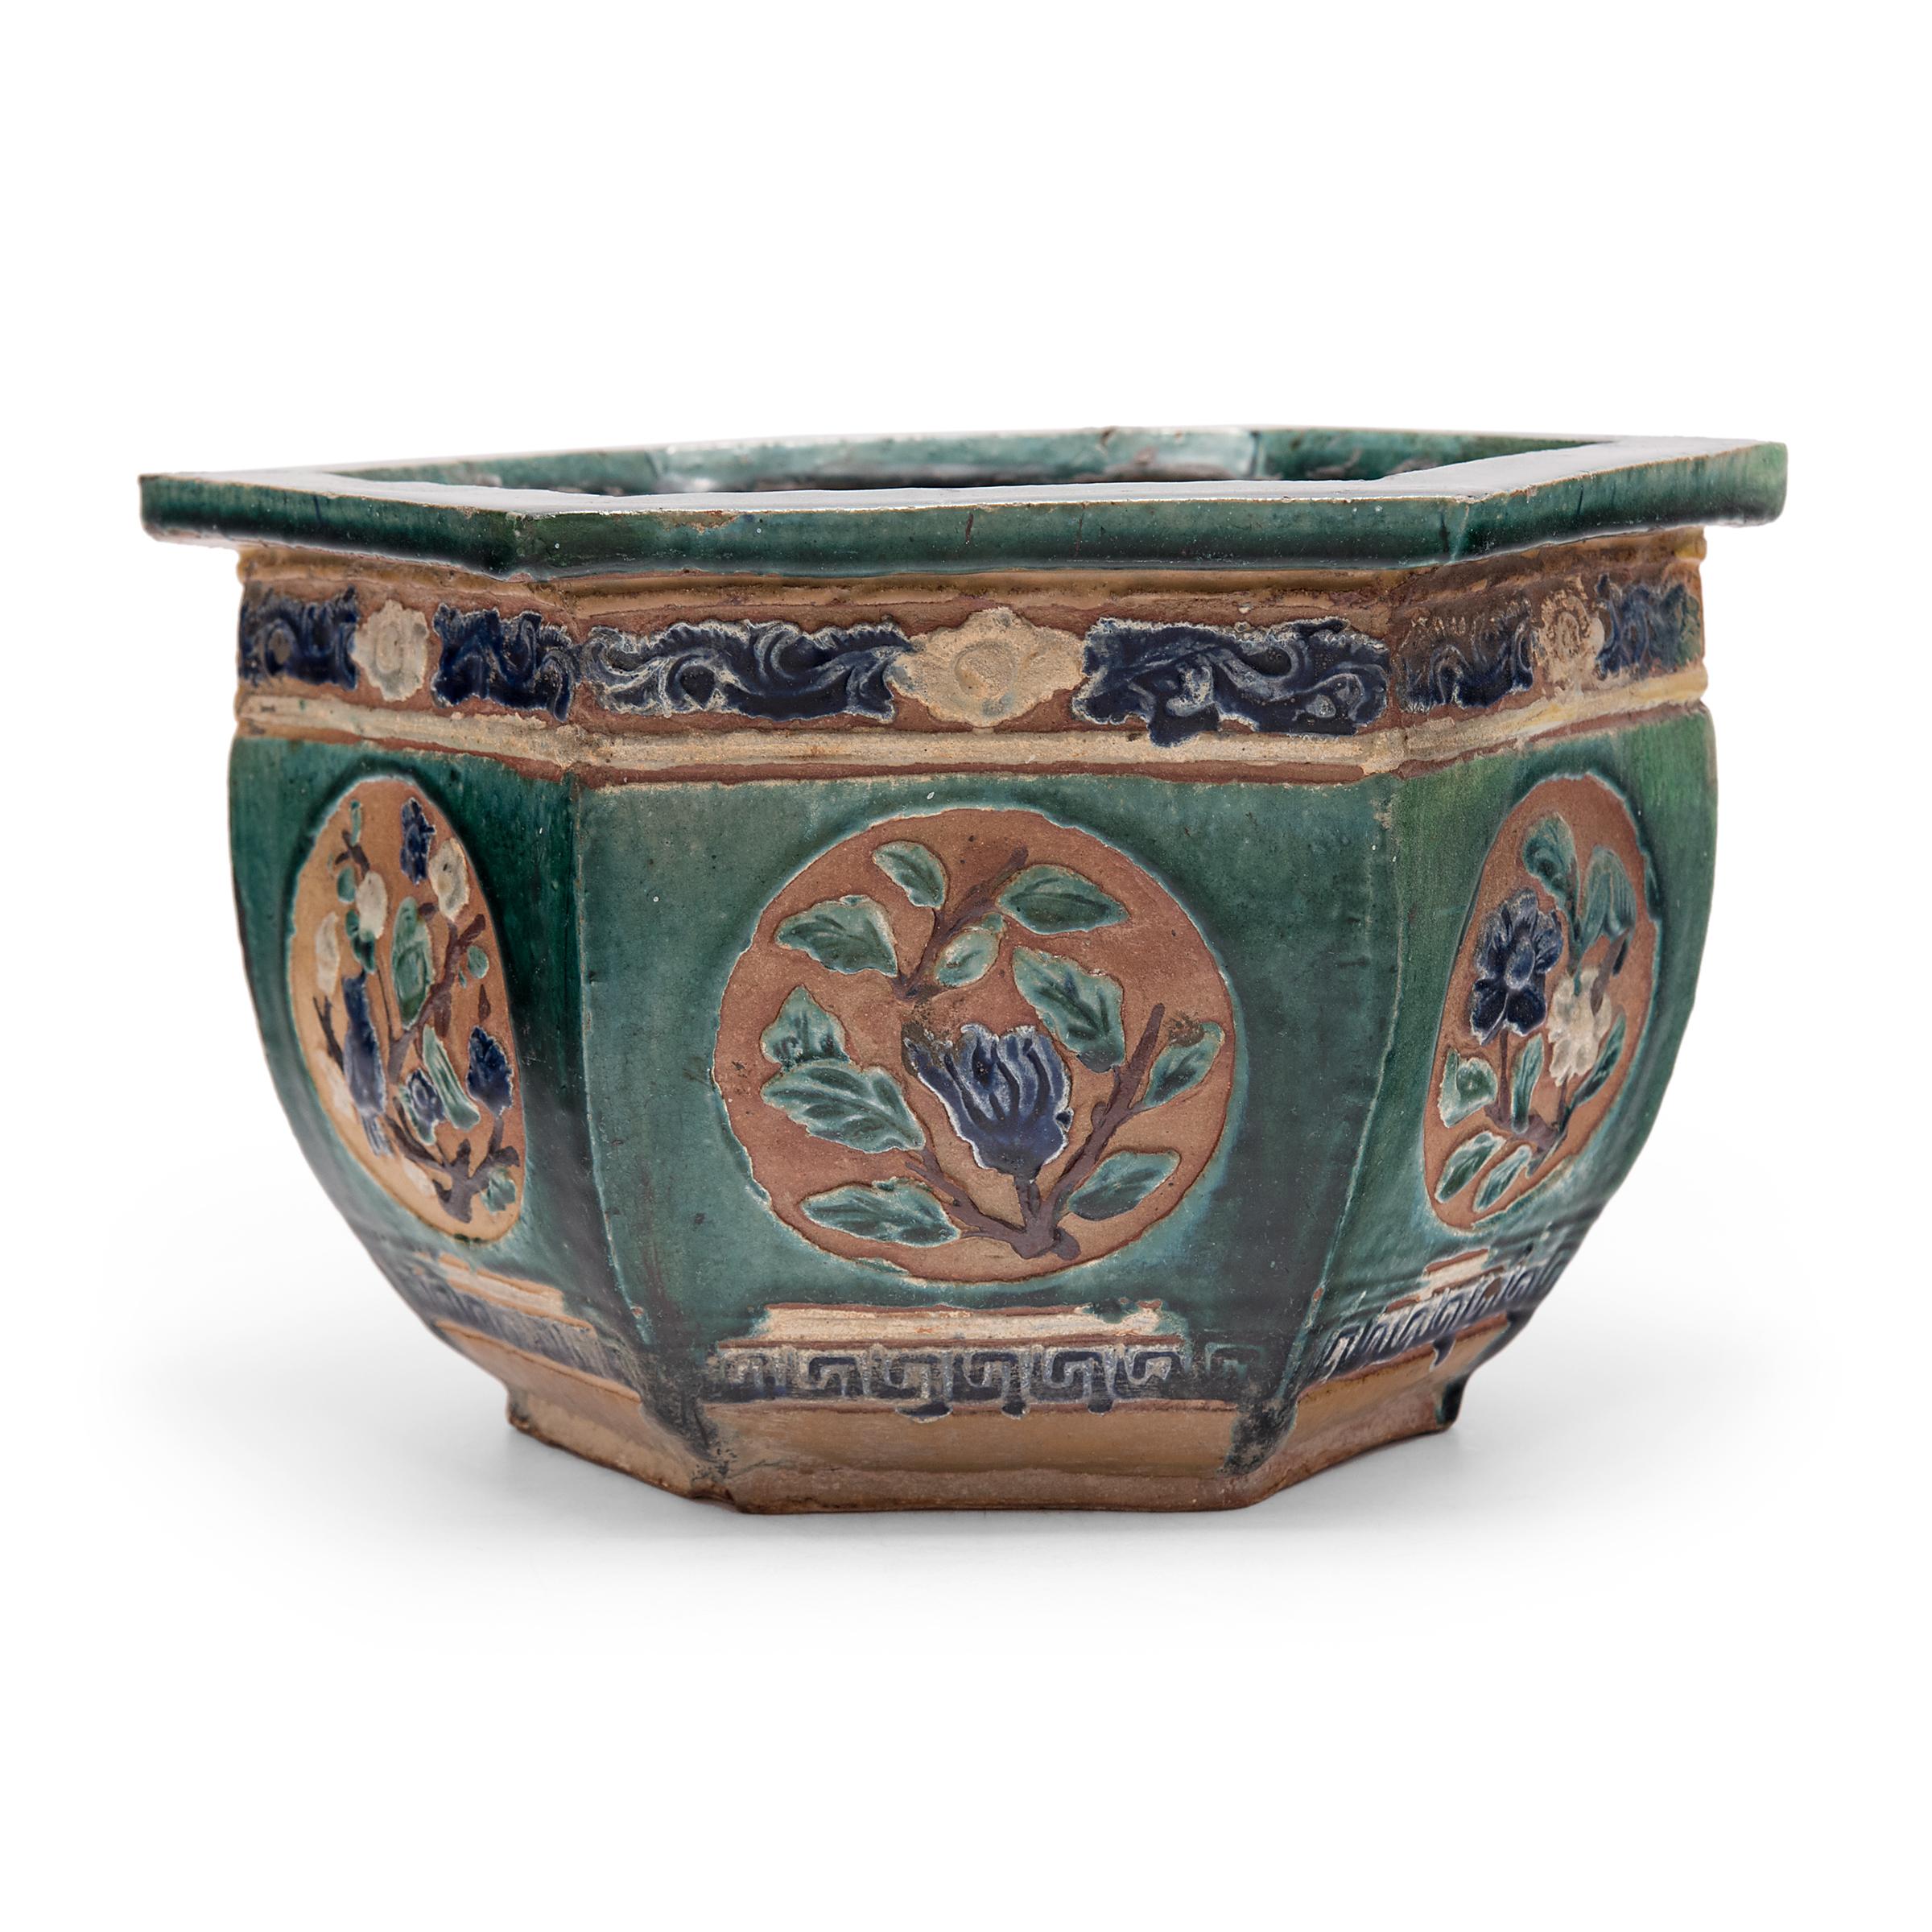 This low ceramic planter dates to the early 20th century and features a wide opening, flat rim, and six gently curving sides. The basin is patterned in low relief with bands of scrollwork and round medallions of flowers, birds, and offering fruits.